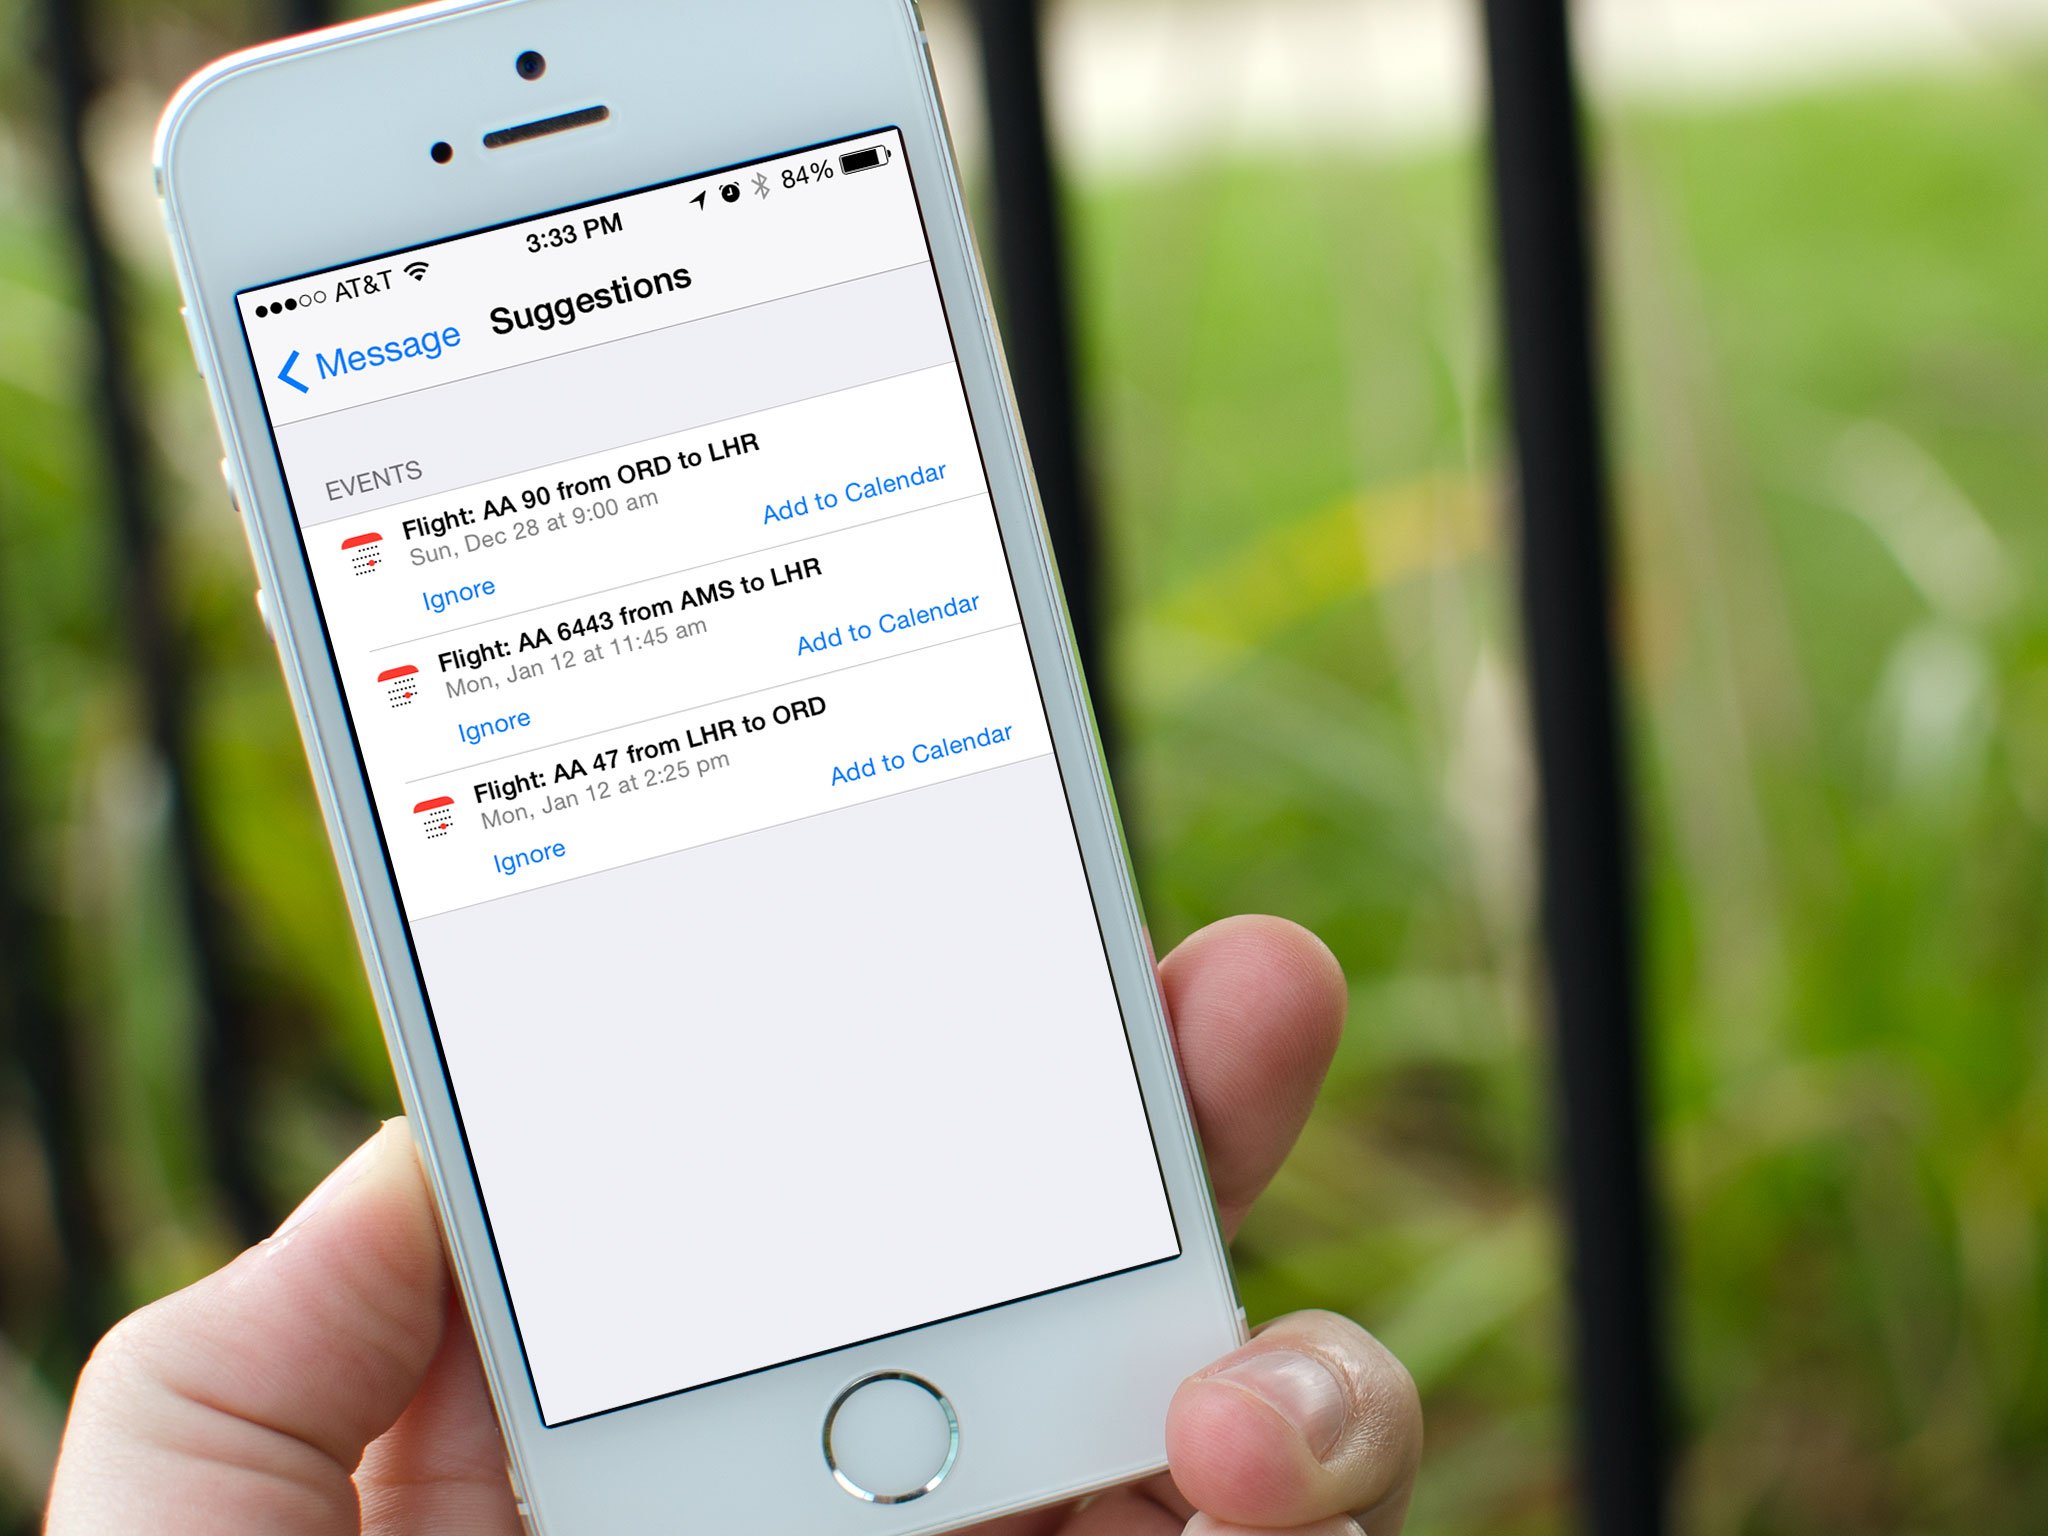 How to capture contact and calendar info automatically in Mail for iOS 8